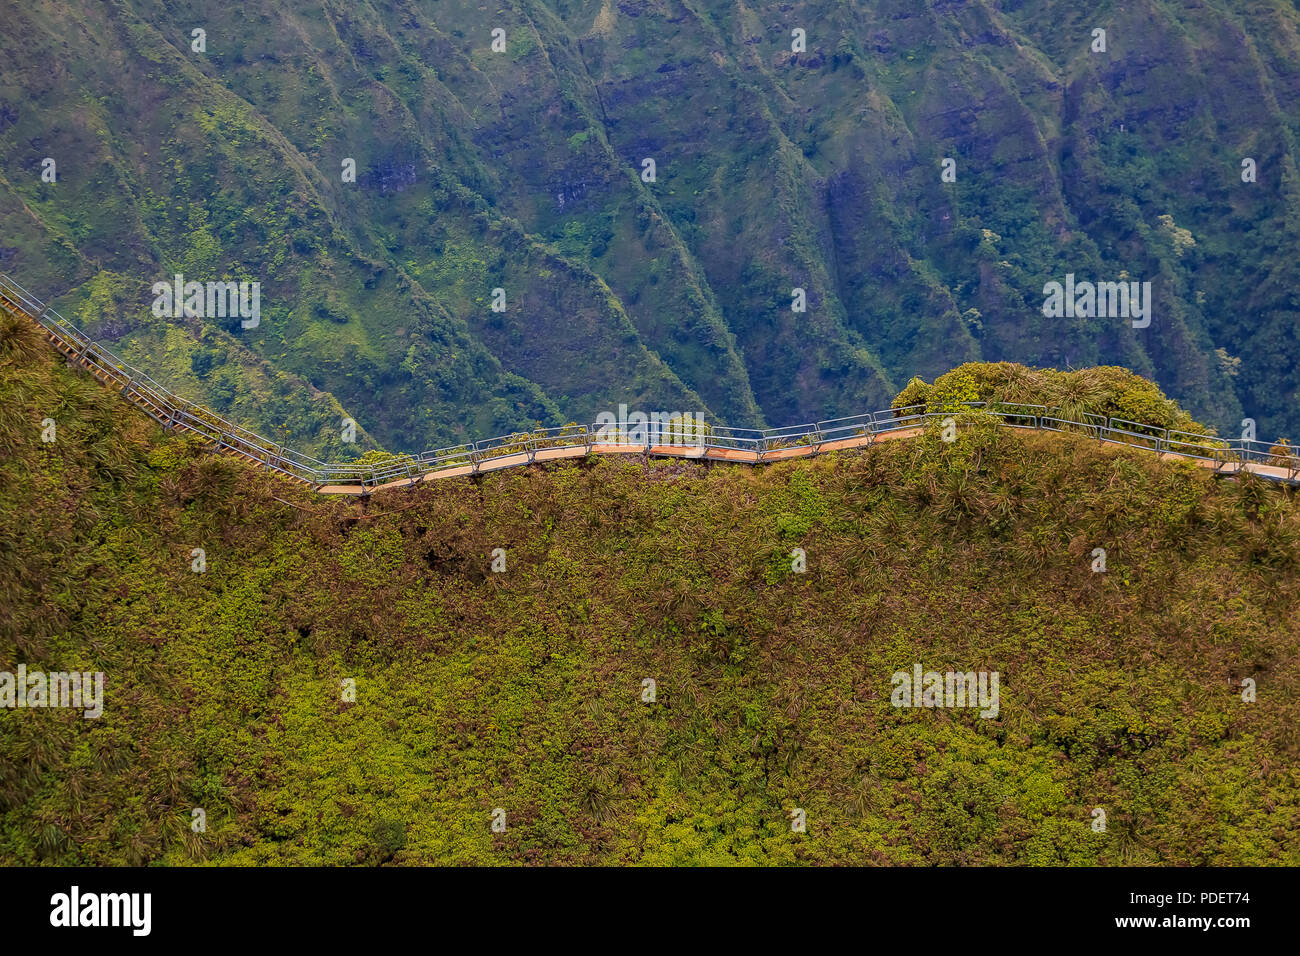 Aerial view of Haiku Stairs, also known as the Stairway to Heaven in Honolulu in Hawaii from a helicopter Stock Photo